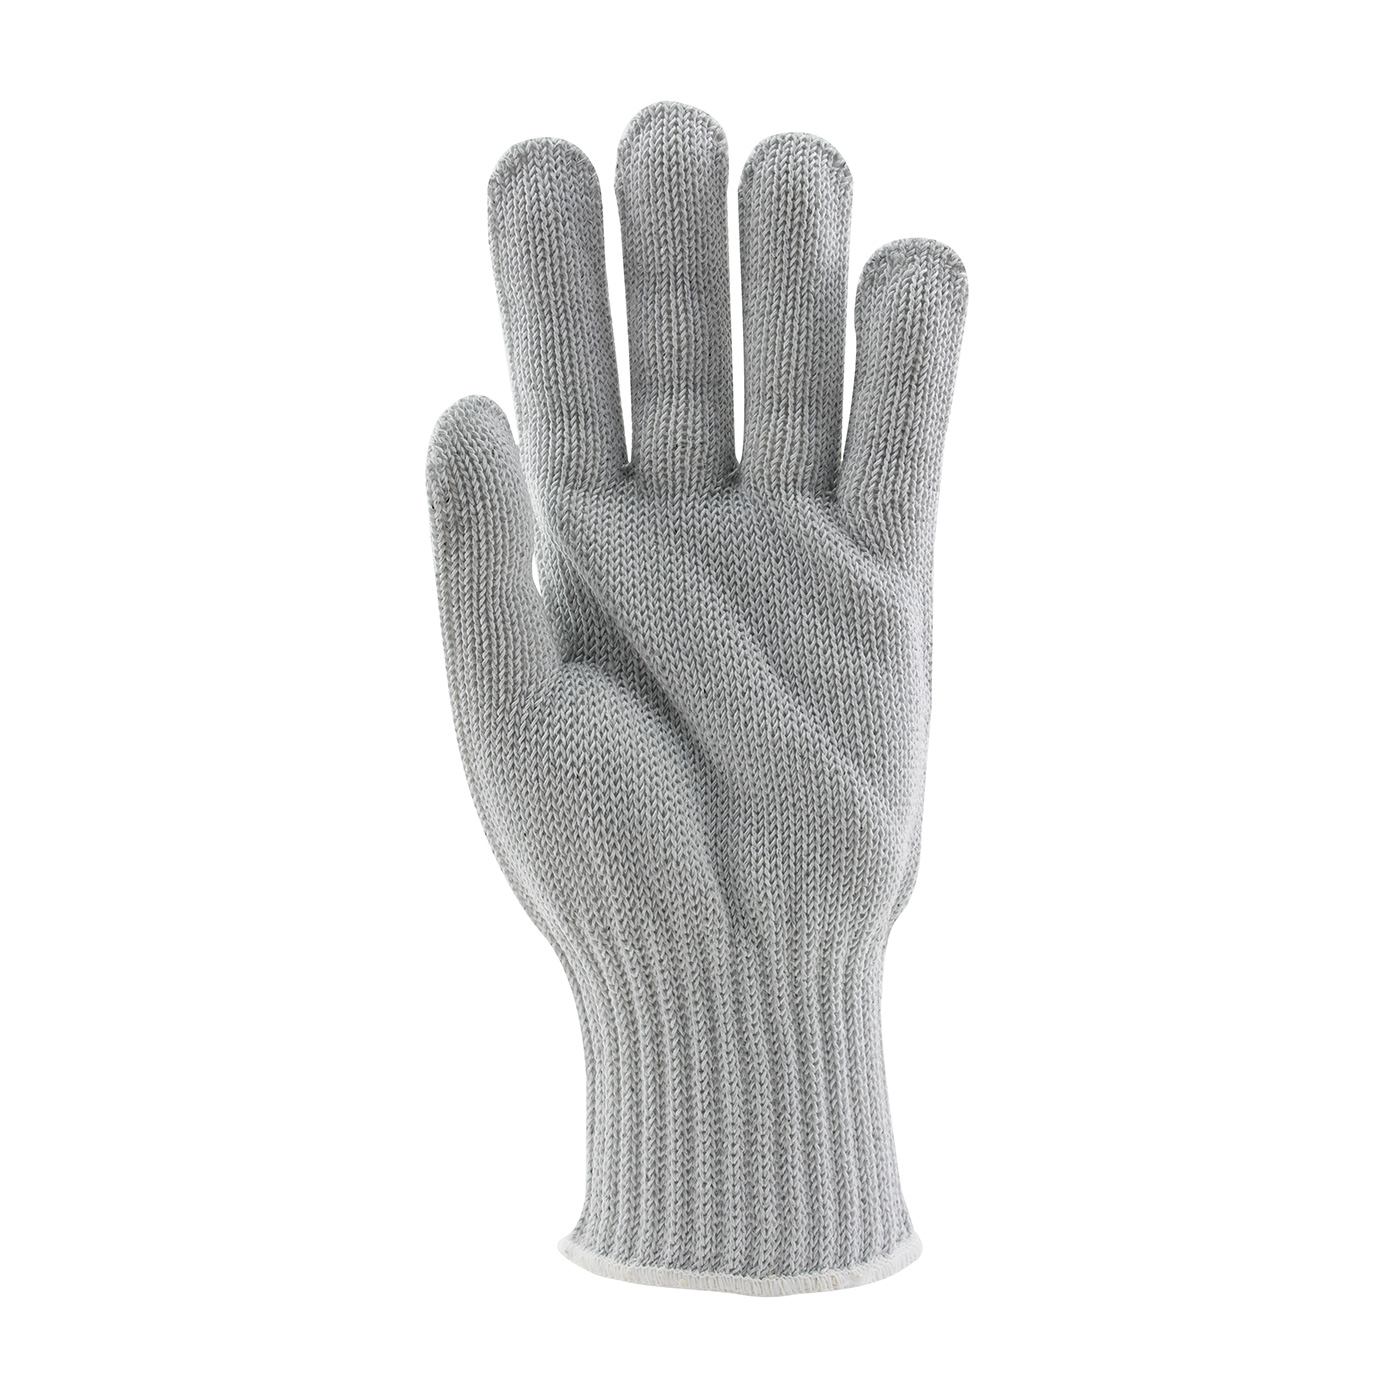 22-900 PIP® Medium Weight Claw Cover® Dyneema® Blended Antimicrobial Glove -